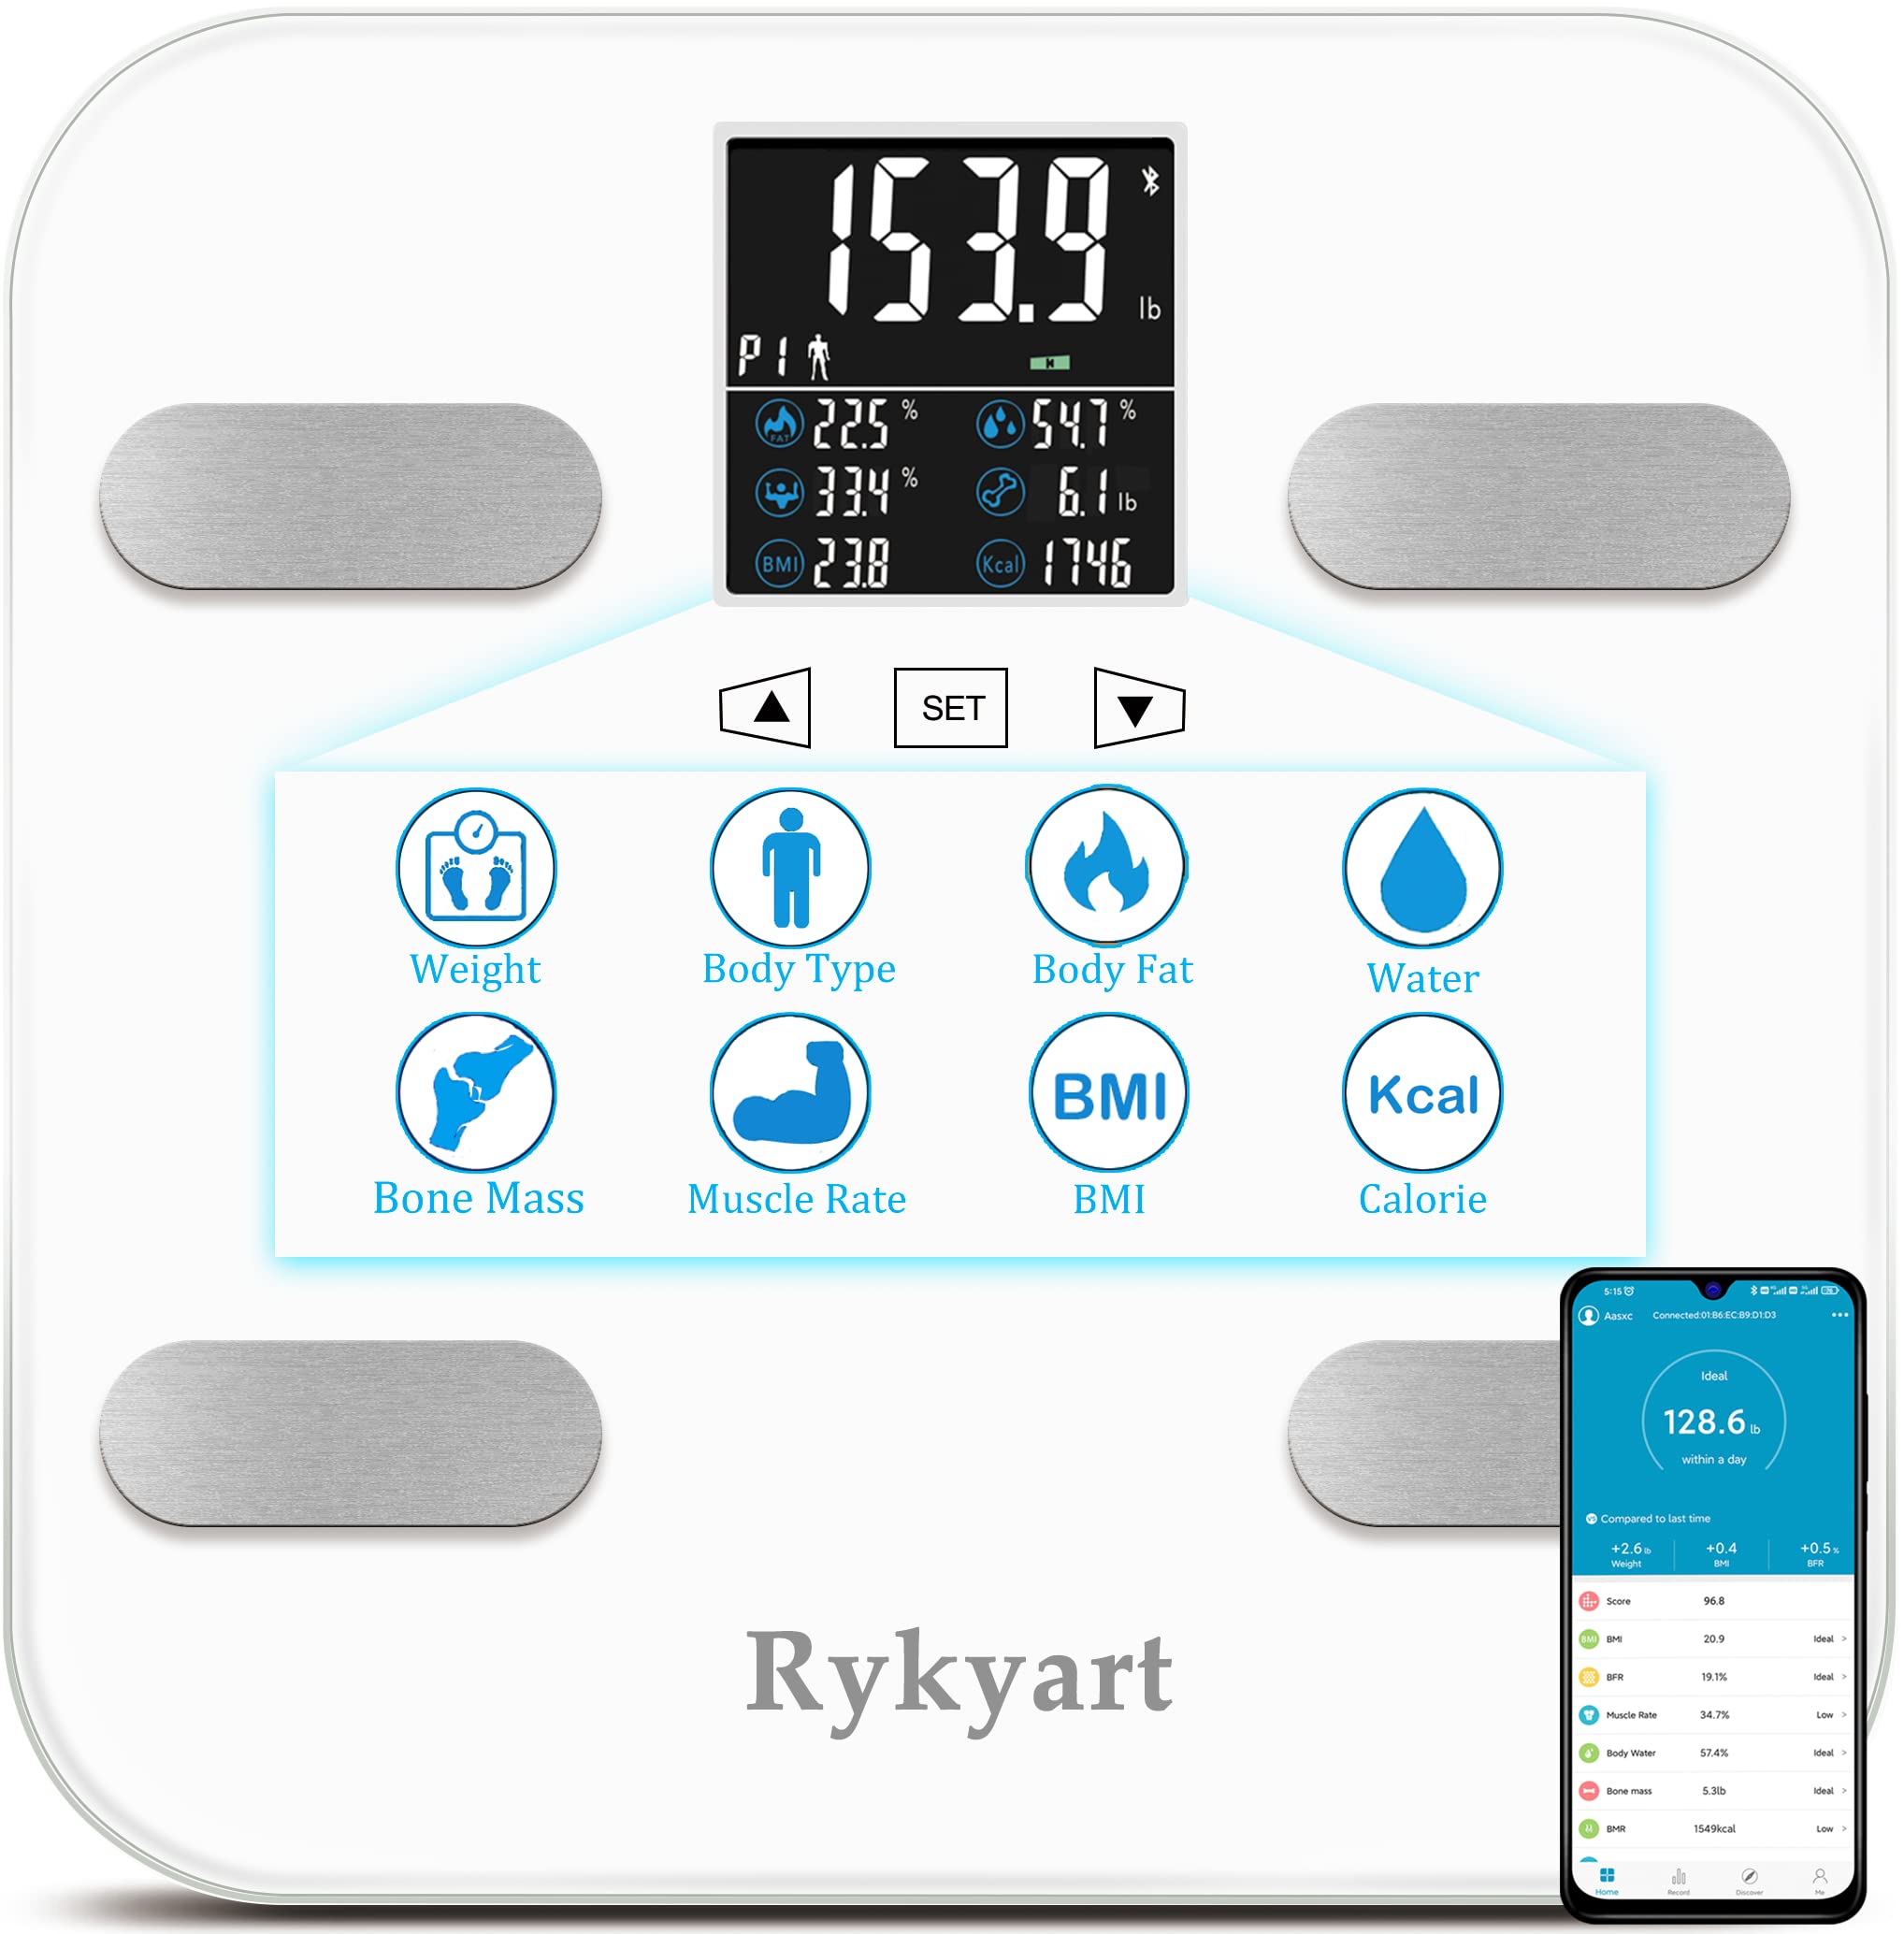 CQRISM Scale Body Weight Scale Smart Digital Fat Scales Bathroom with  Automatic Smartphone App Sync for Body Weight,Fat,BMI, Monitor Health  Analyzer with Free APP price in Saudi Arabia,  Saudi Arabia